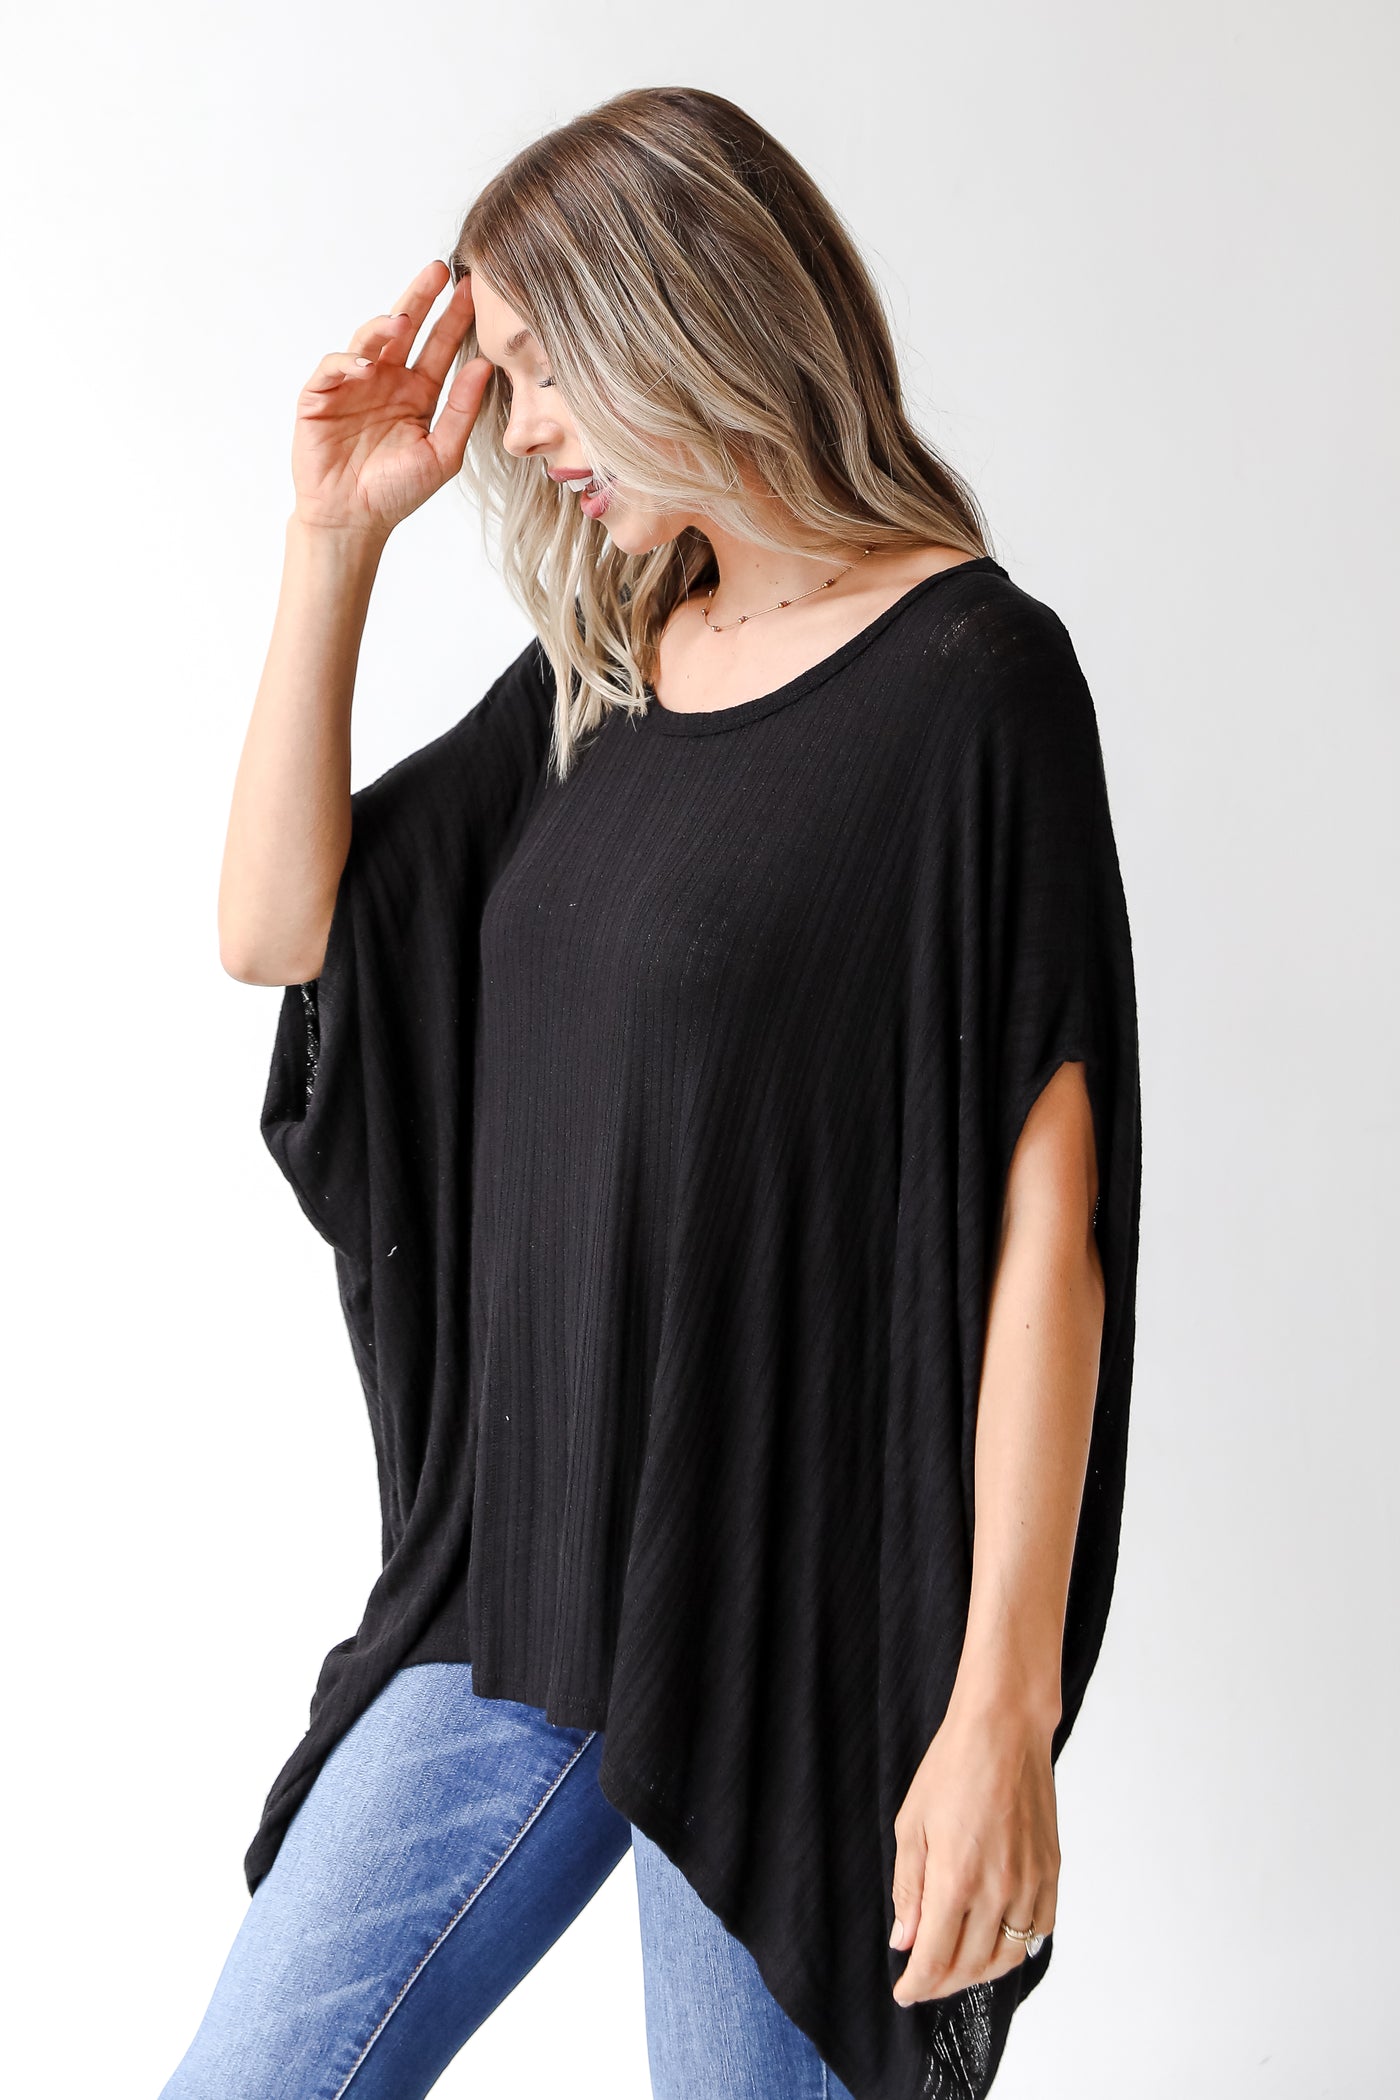 black oversized top side view